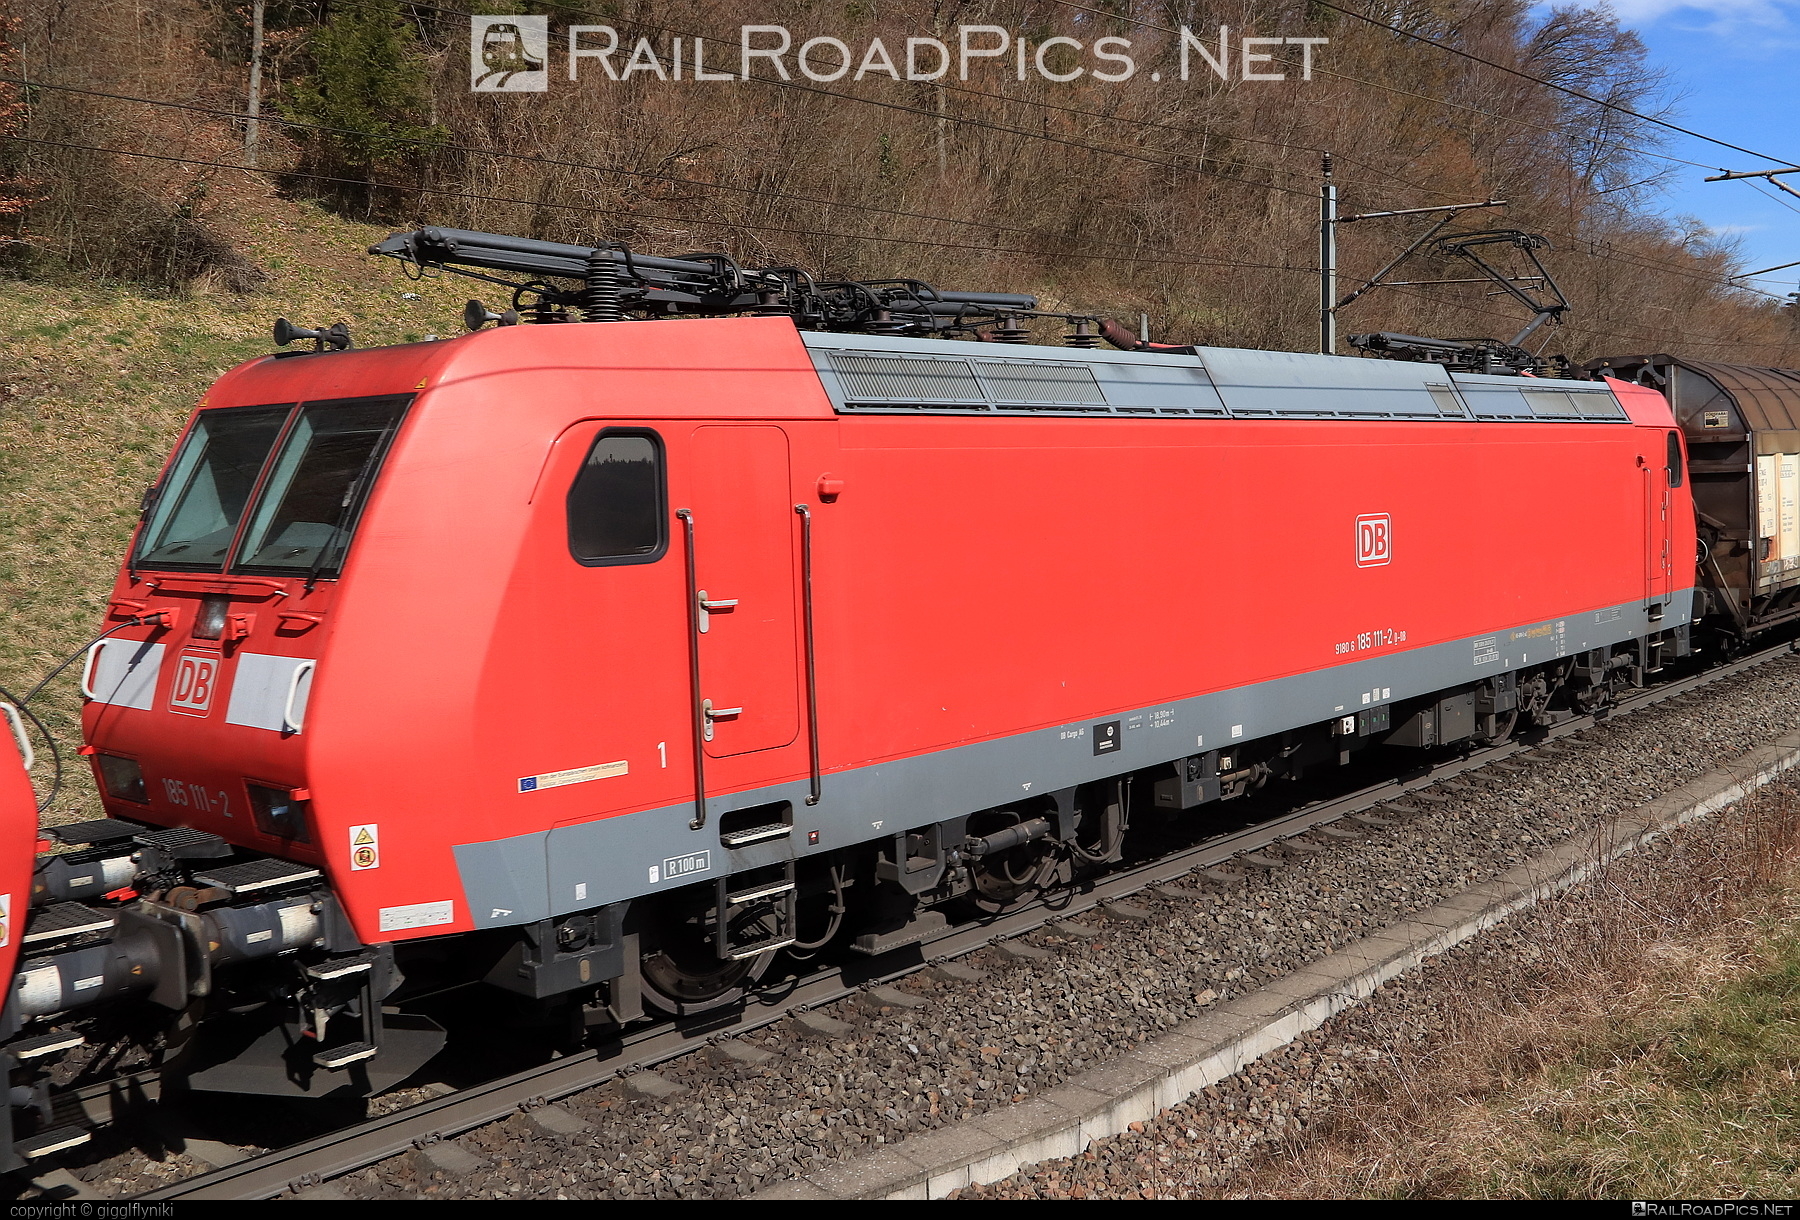 Bombardier TRAXX F140 AC1 - 185 111-2 operated by DB Cargo AG #bombardier #bombardiertraxx #db #dbcargo #dbcargoag #deutschebahn #traxx #traxxf140 #traxxf140ac #traxxf140ac1